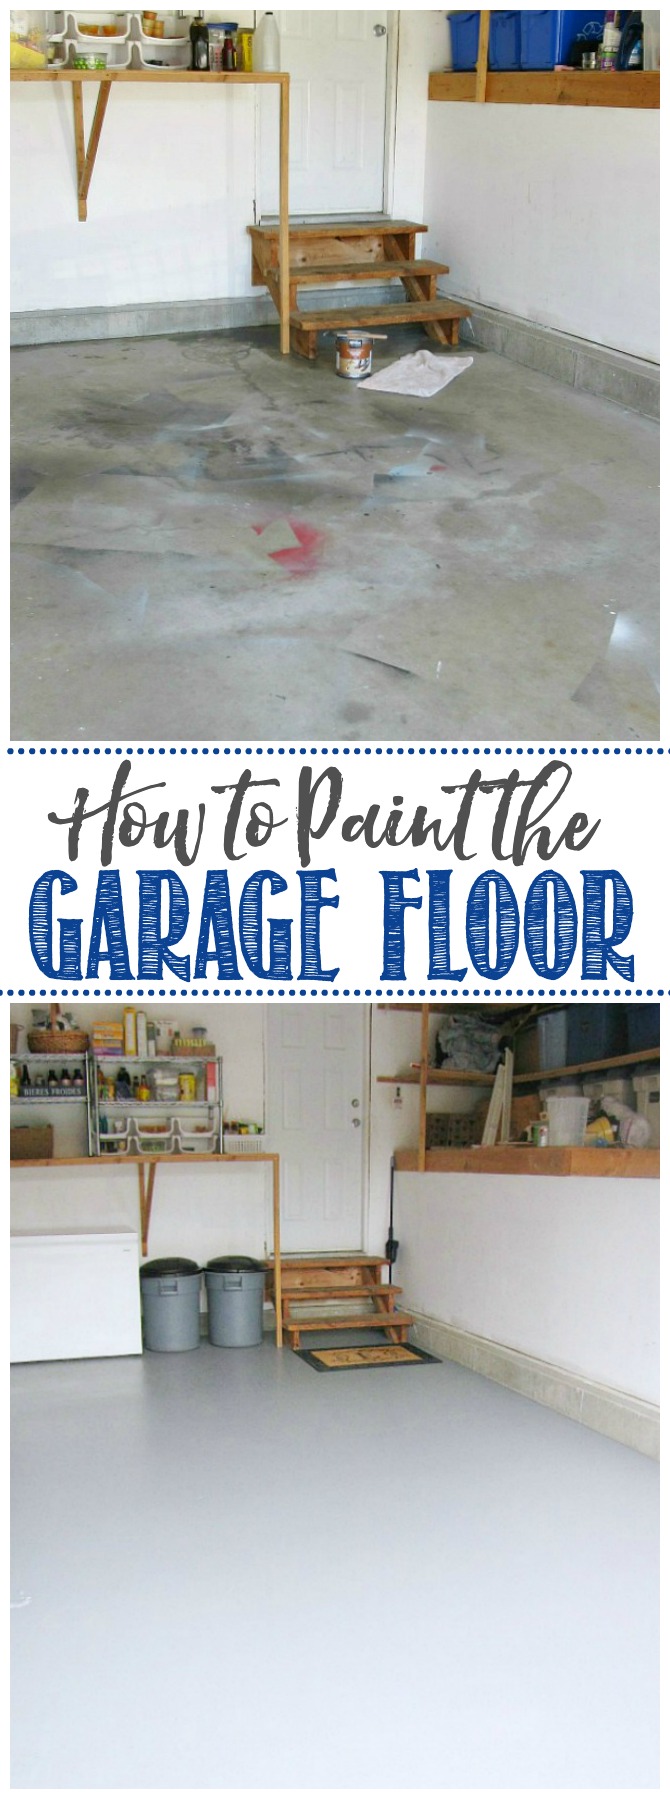 Before and after photos of a painted garage floor.